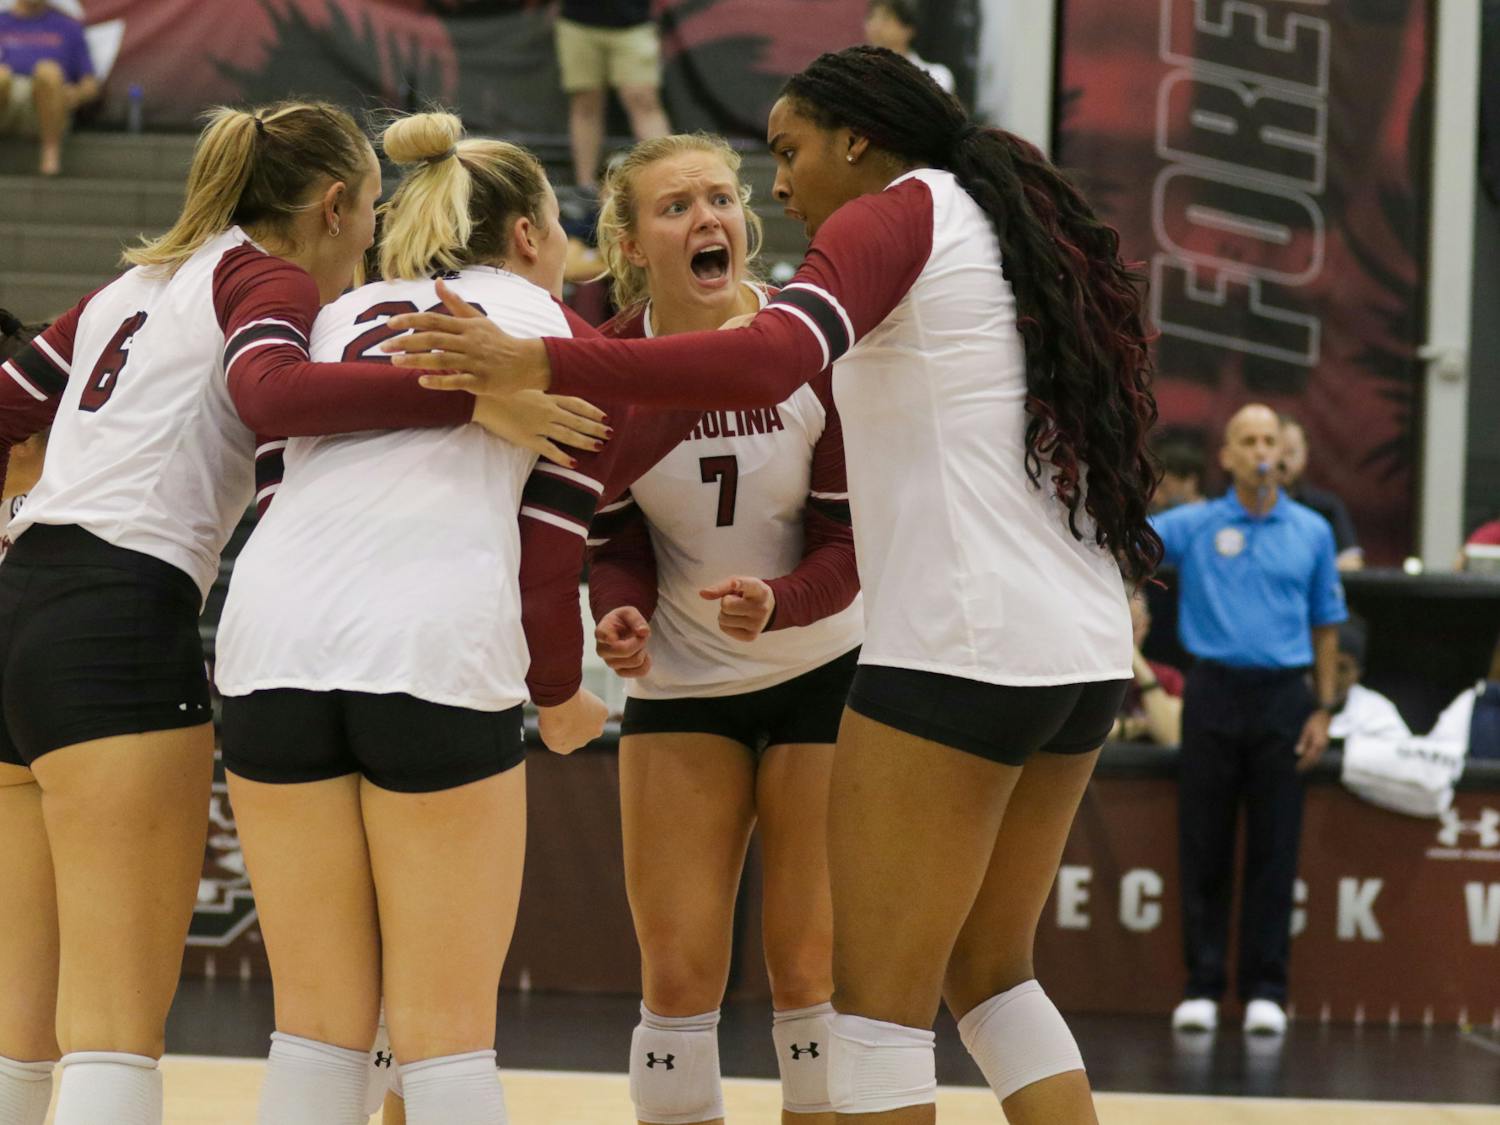 The Gamecocks beat out the Tigers in their two weekend matches. With a comeback win on Oct. 1, 2022, and a straight-set win on Oct. 2, 2022, South Carolina closed off the week with two hard earned victories.